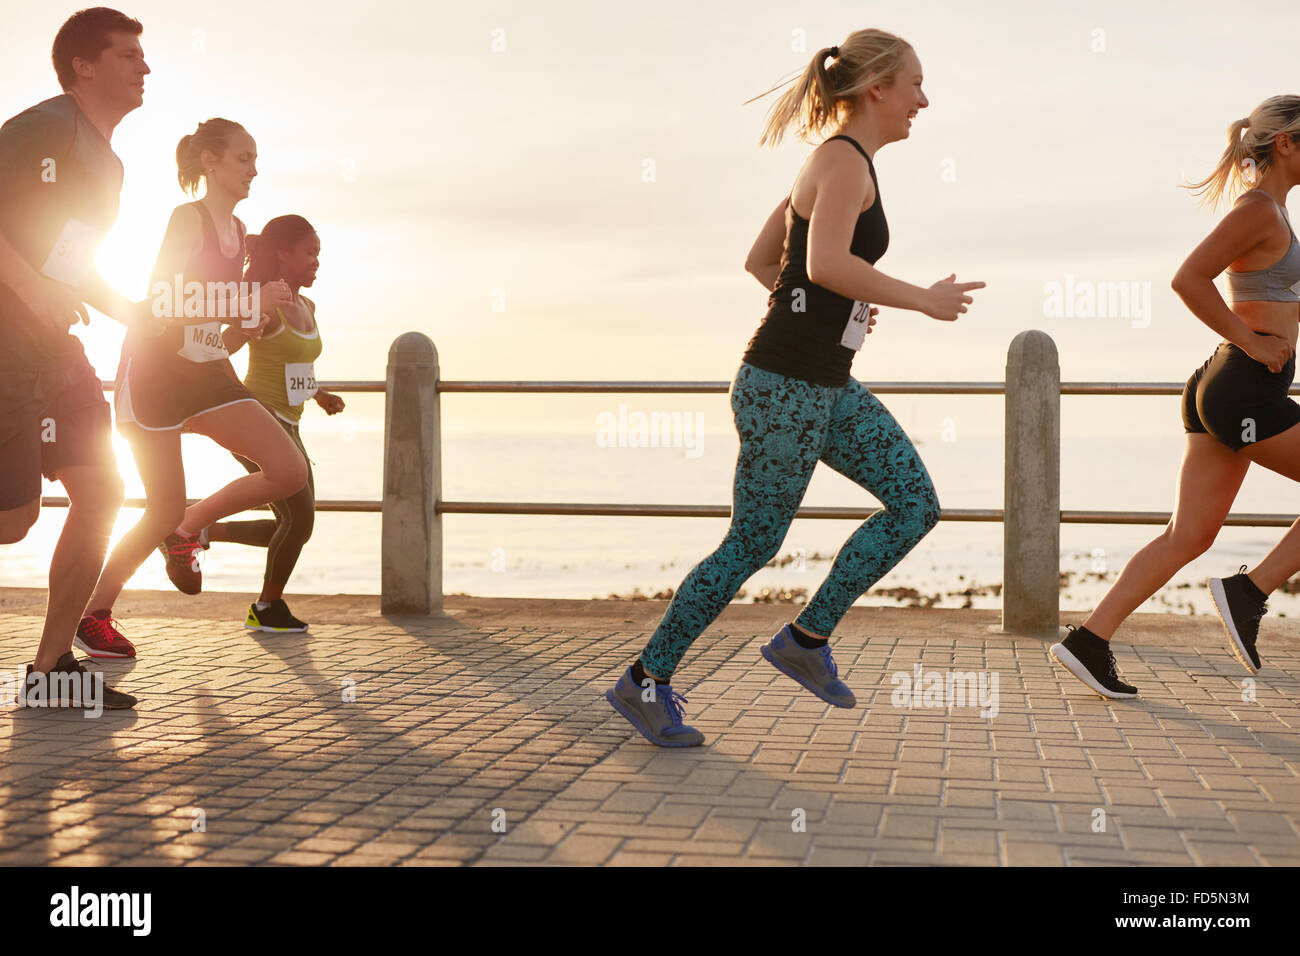 Portrait of young people running on seaside promenade. Men and women running marathon on road by the sea at sunset. Stock Photo